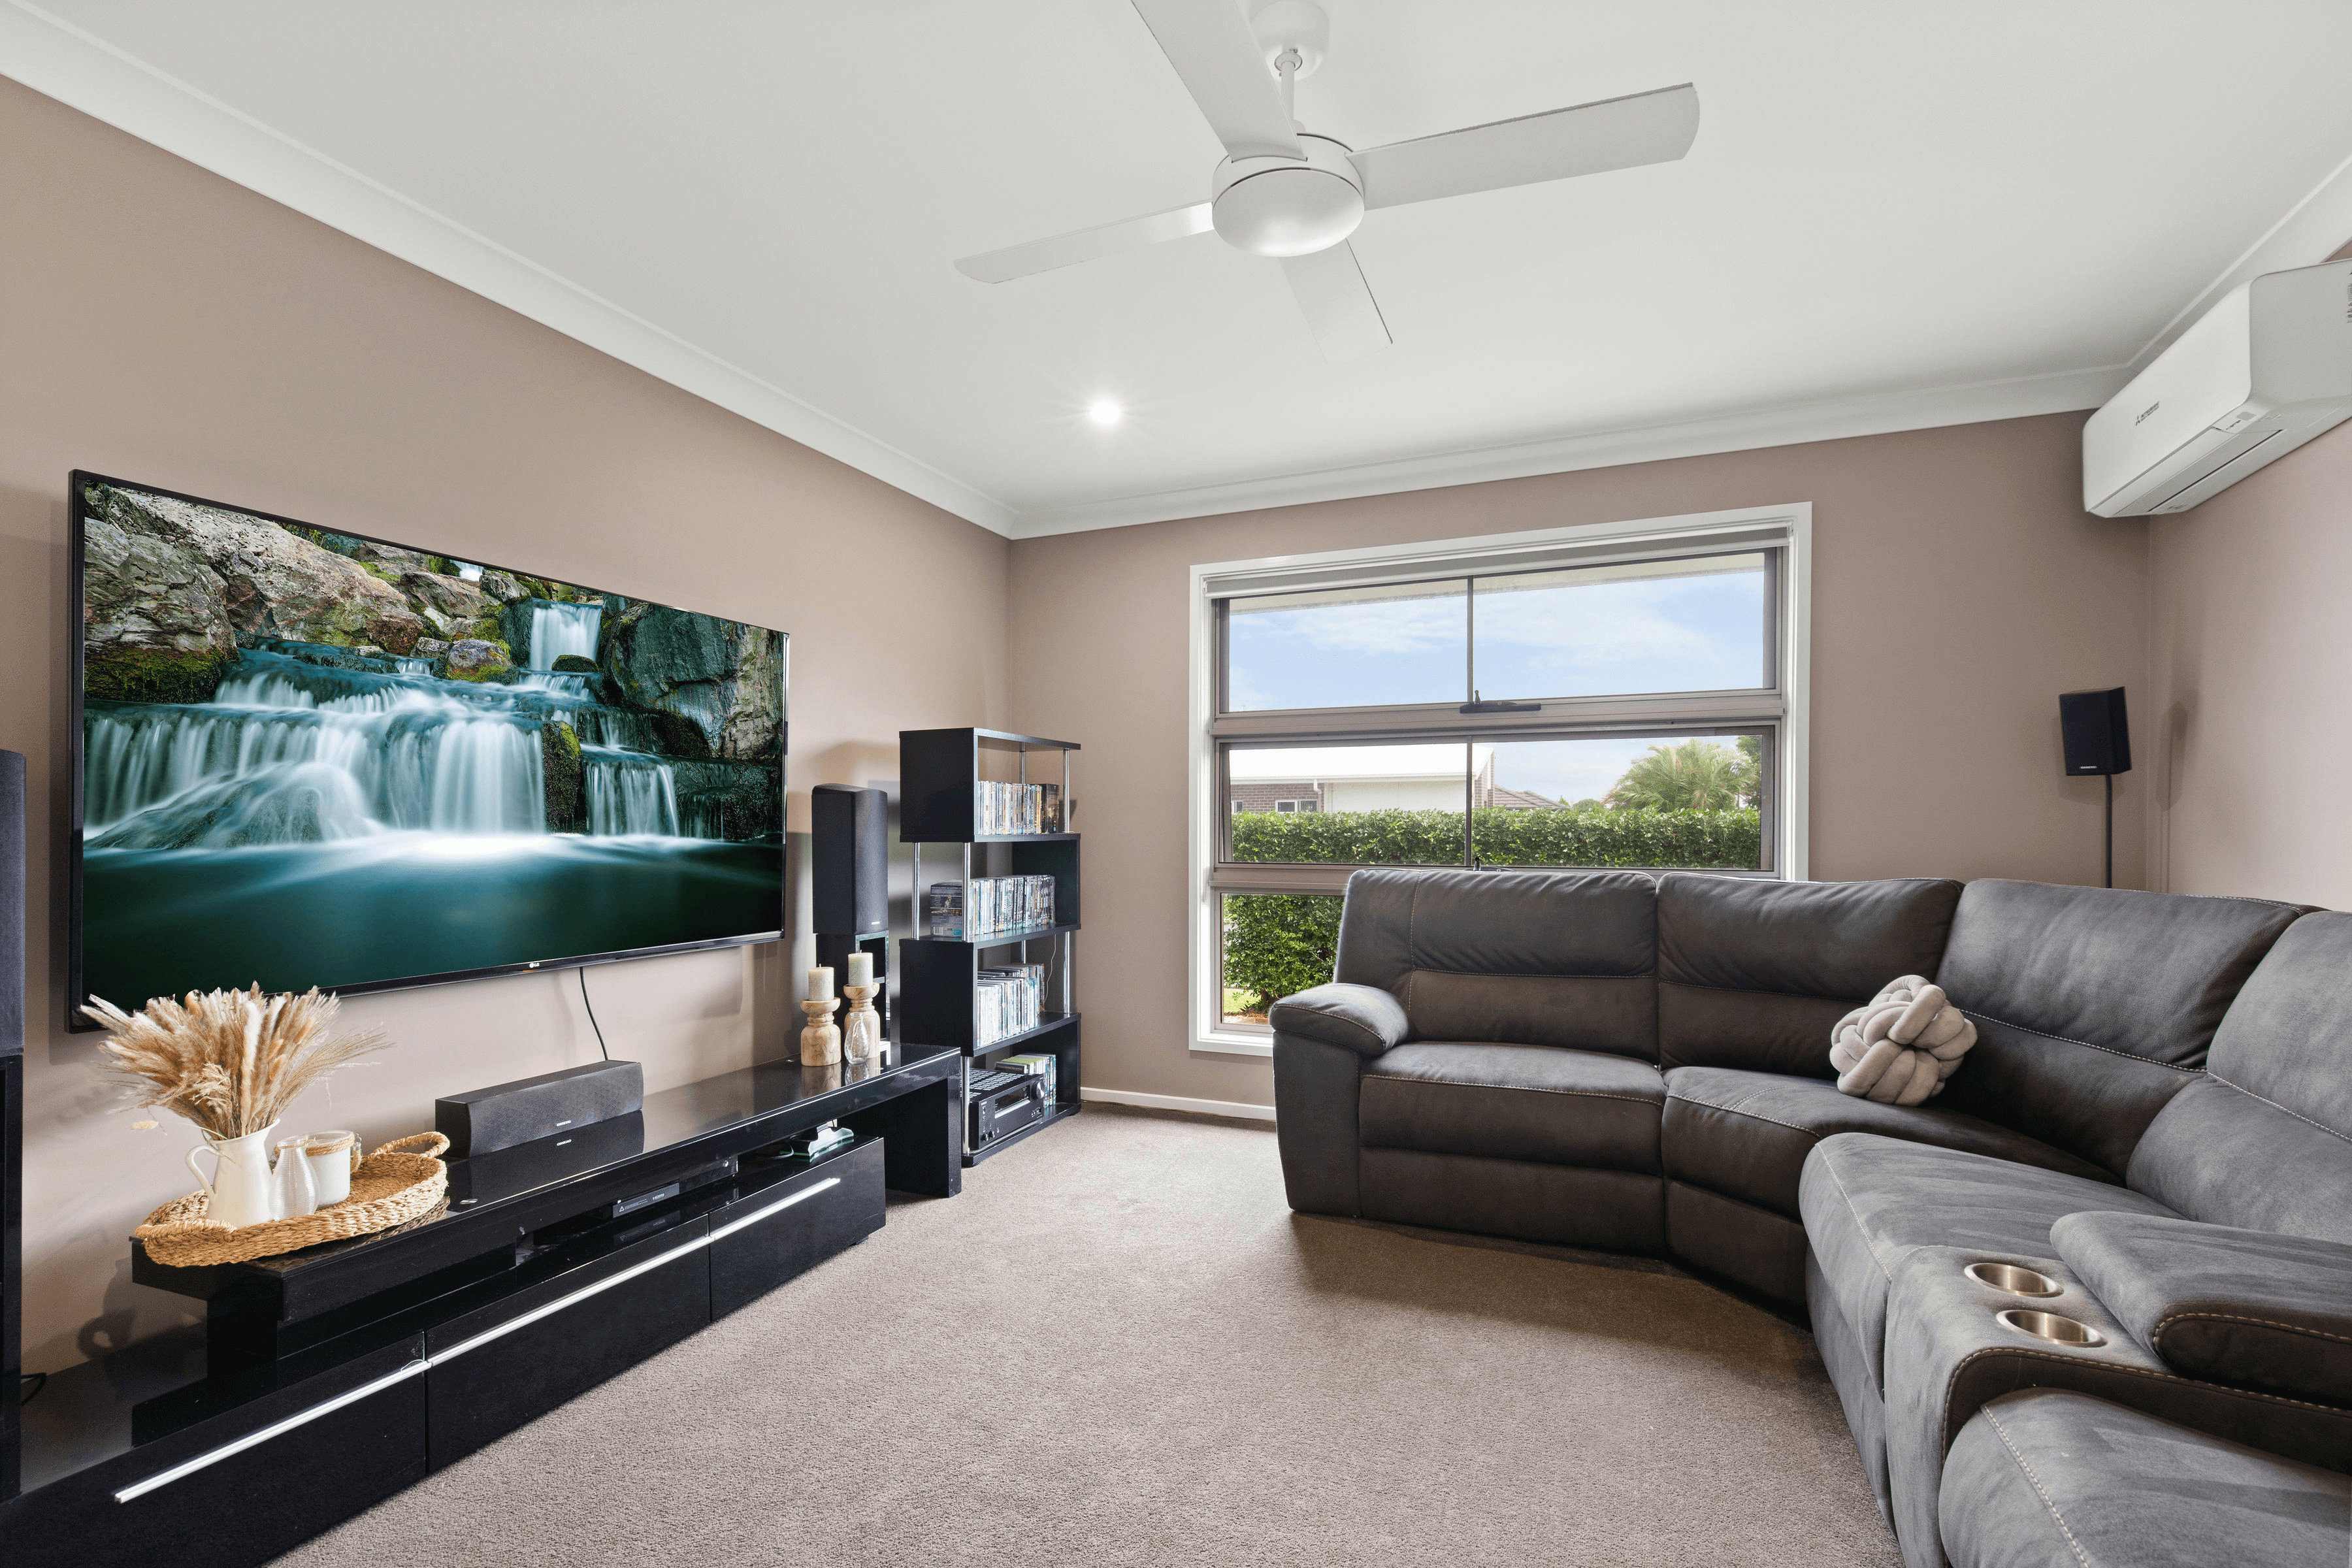 18 Jeffreys St, Caboolture South, QLD 4510